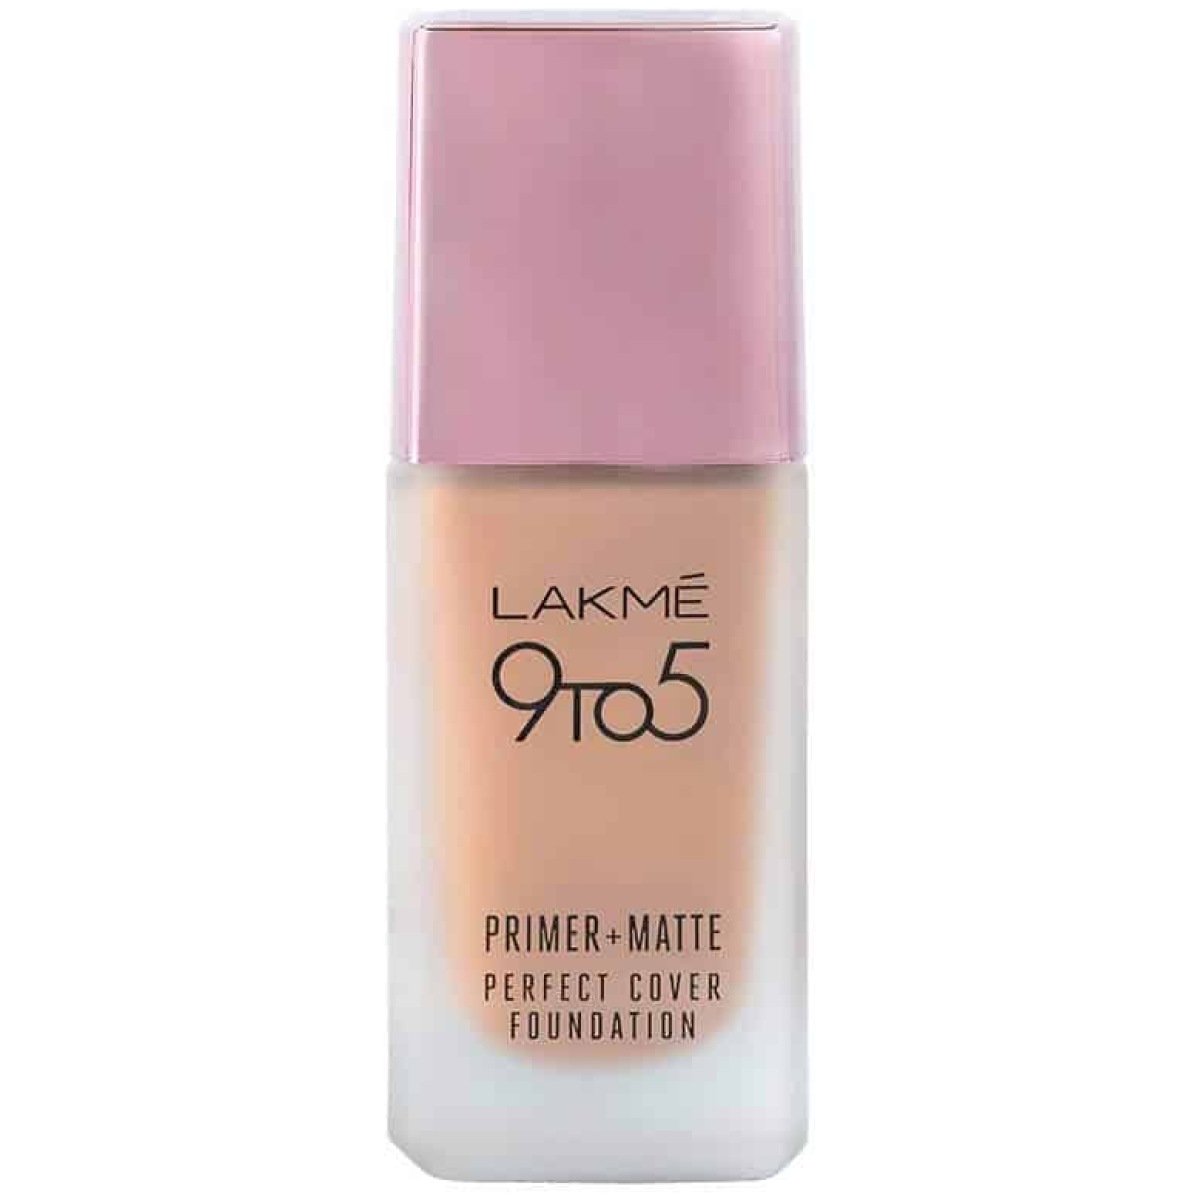 Lakme 9to5 Primer + Matte Perfect Cover Foundation - C100 Cool Ivory (25ml)